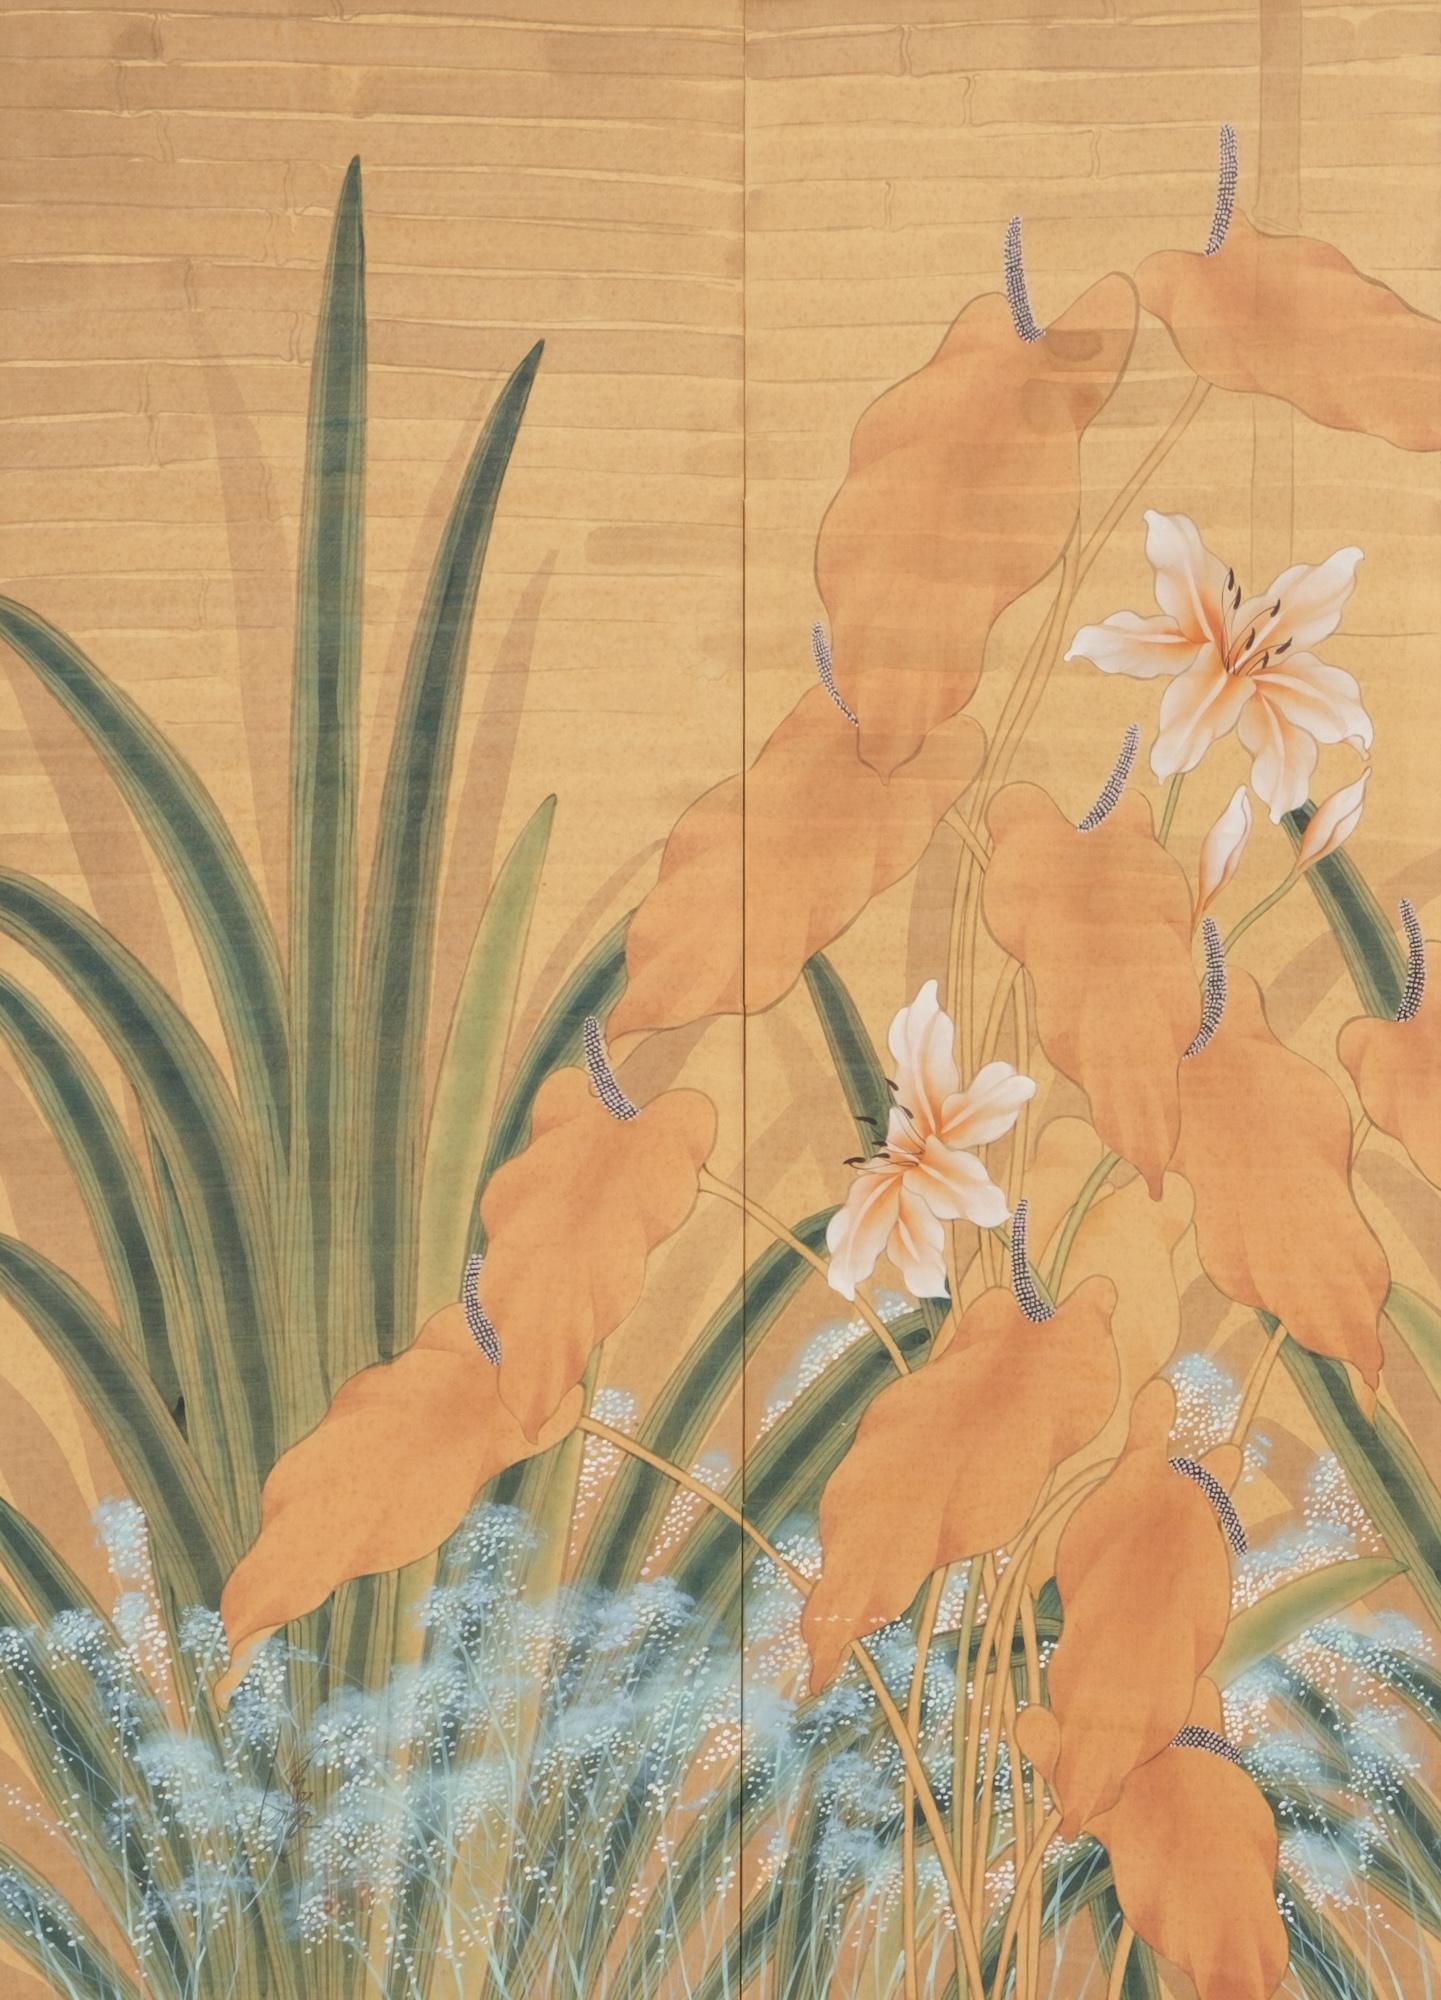 20th Century Japanese Mid-Size 4-Panel Byôbu 屏風 'Room Divider' with an Exotic Flower Garden